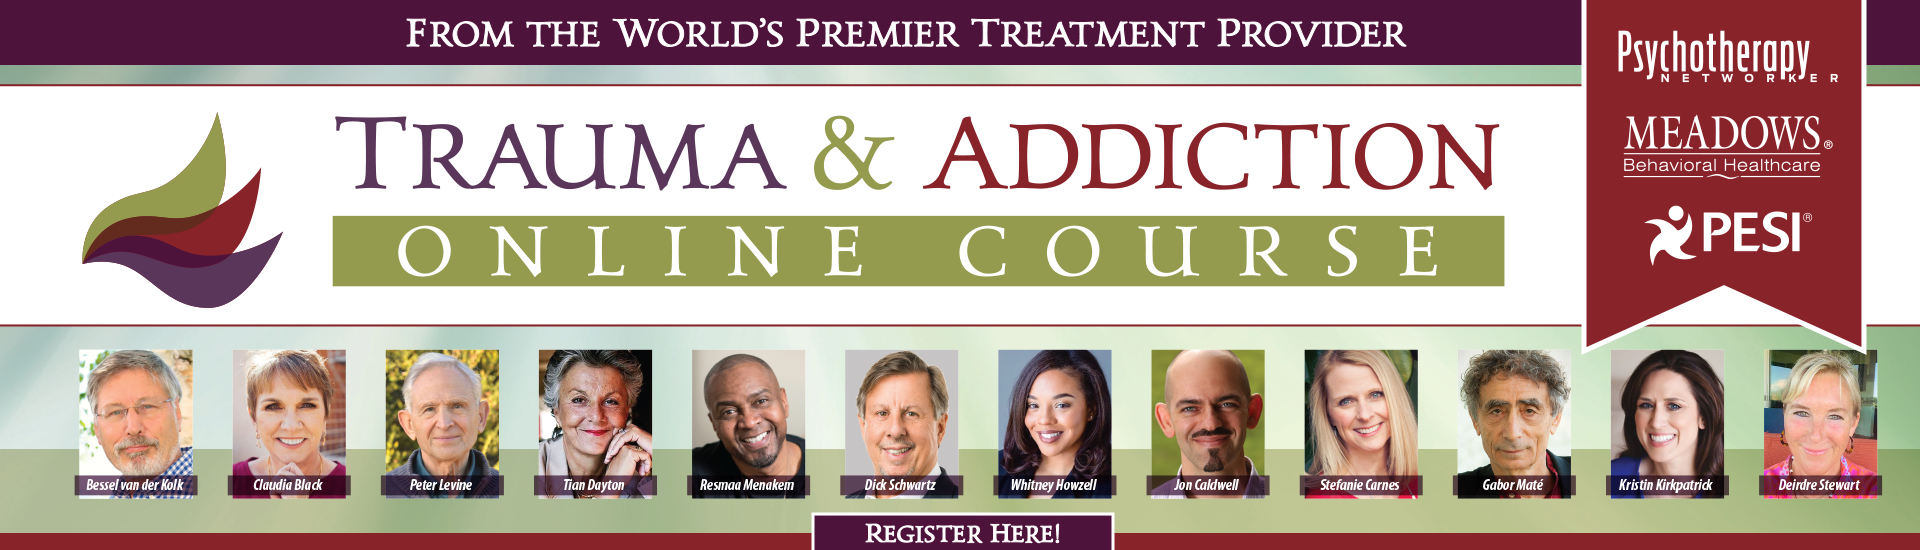 The Meadows’ Trauma & Addictions Online Conference